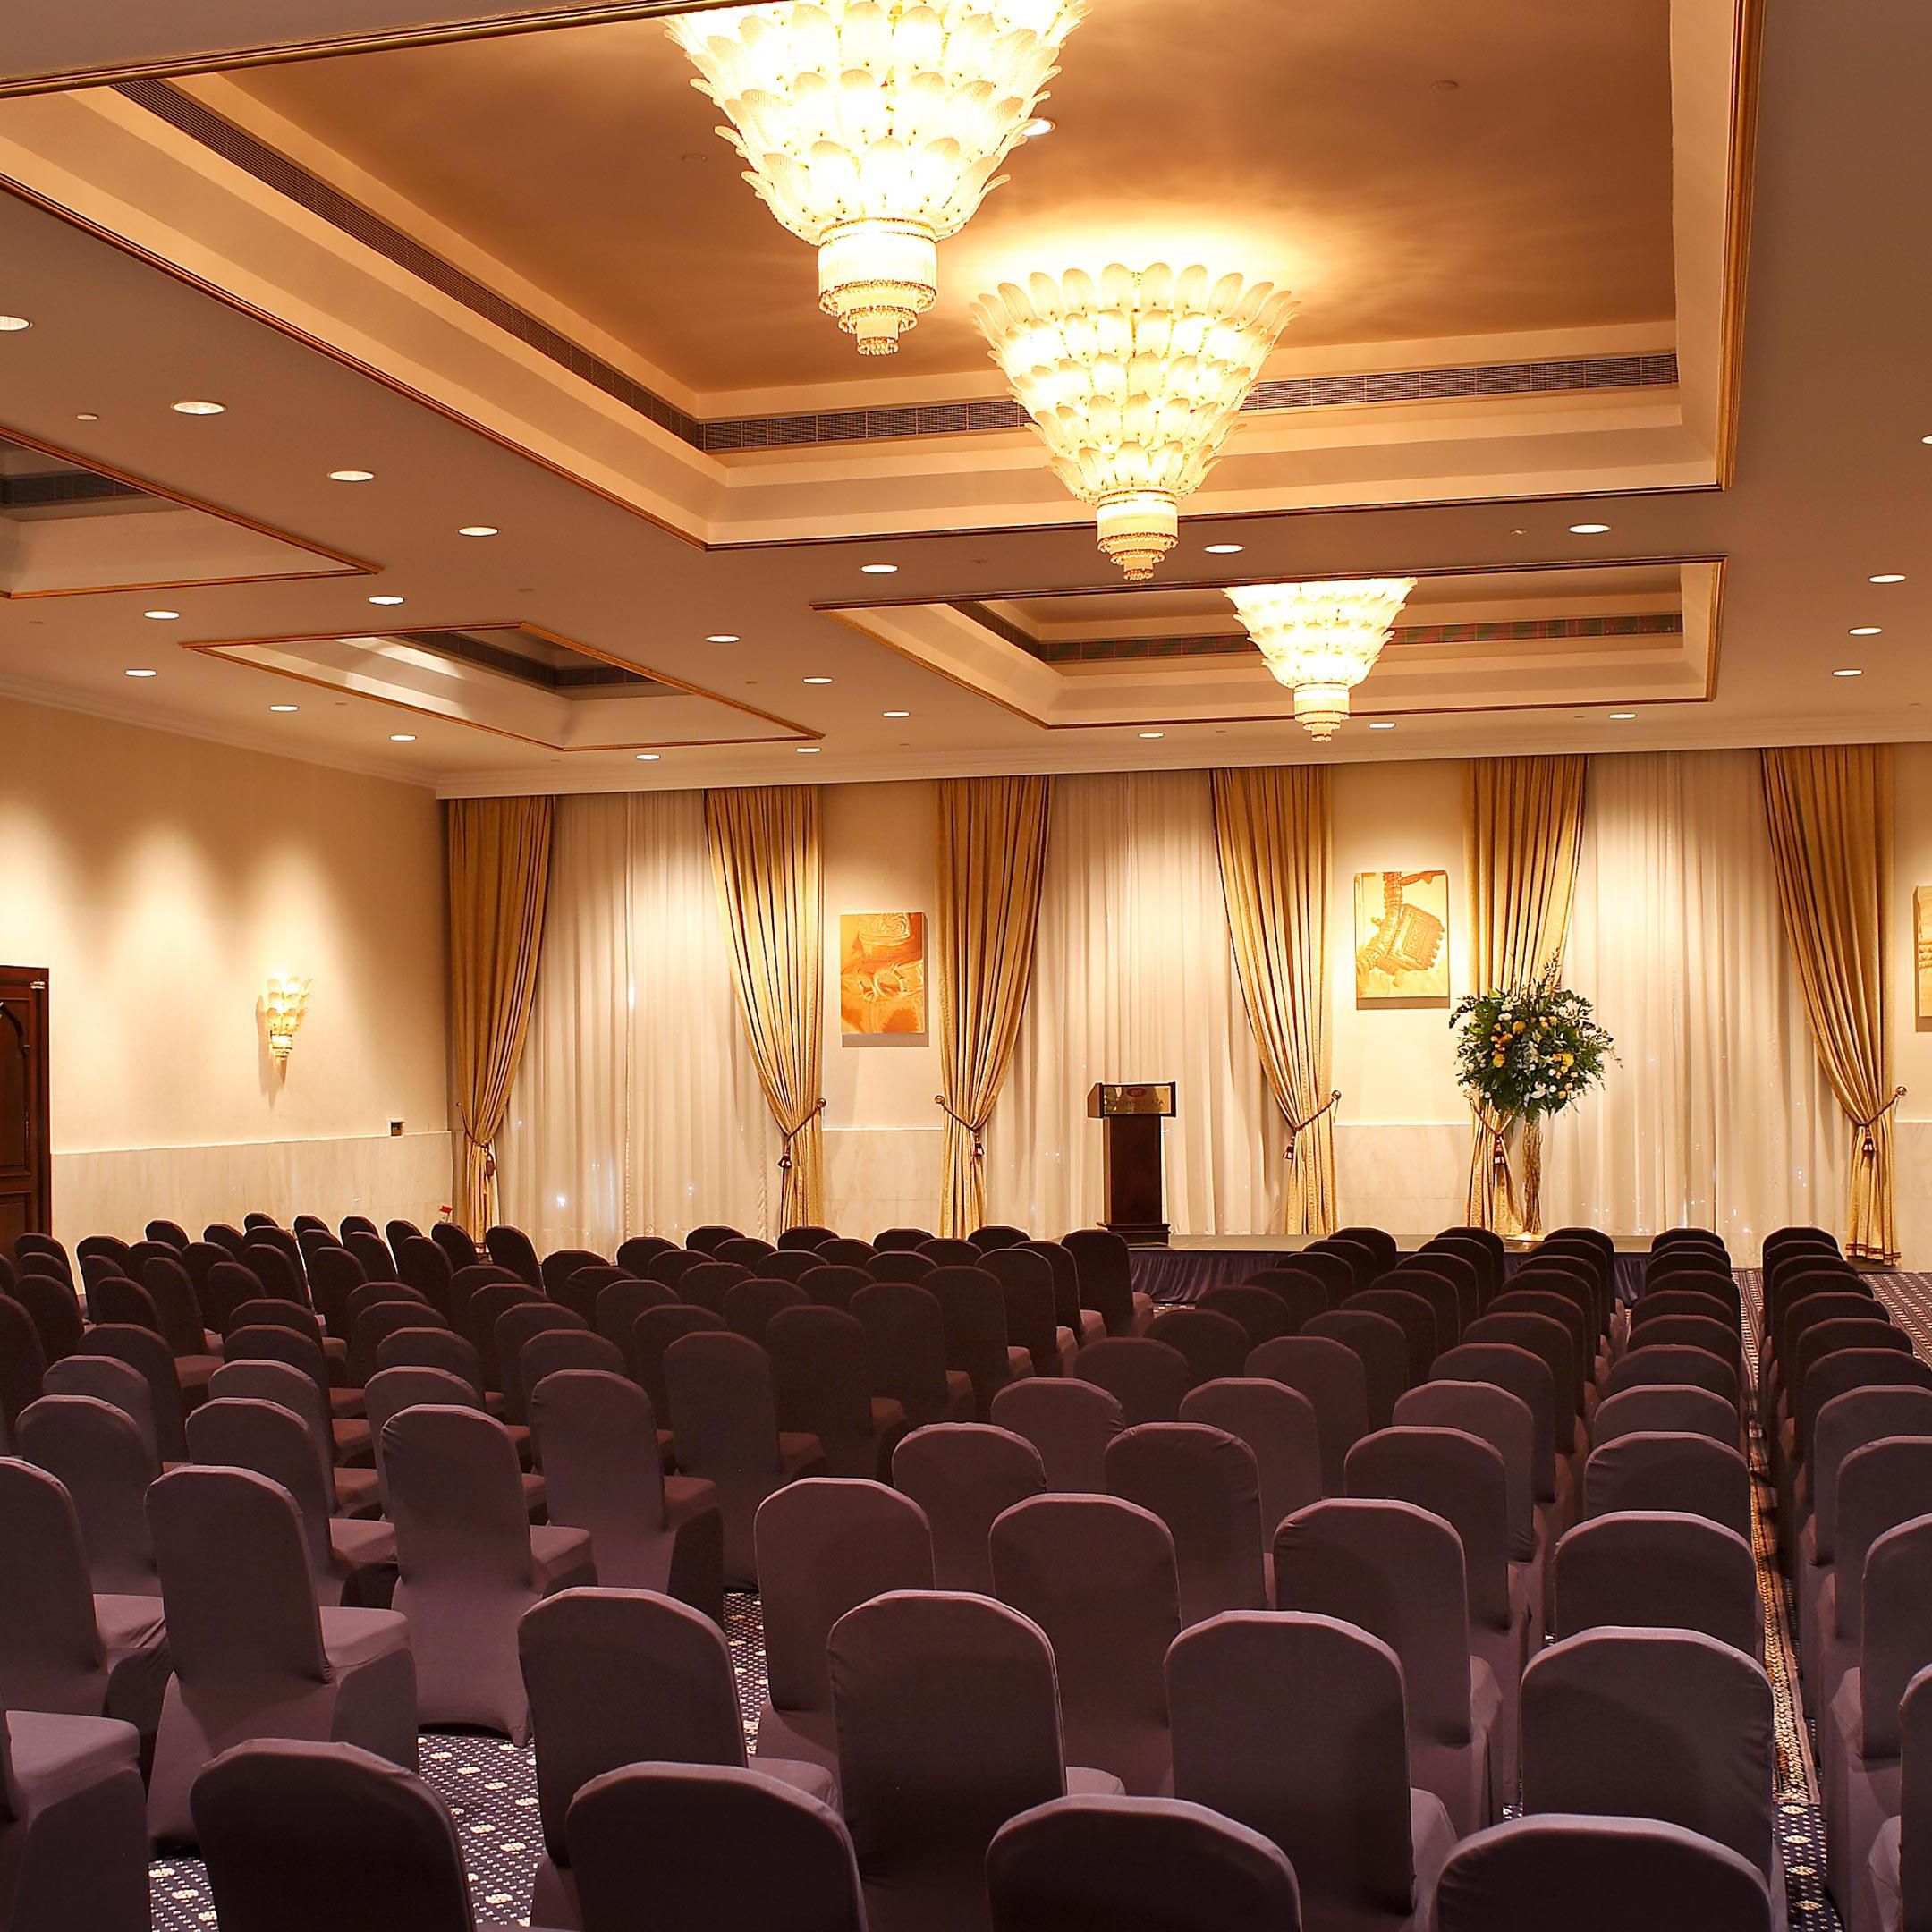 Al Sindbad ballroom can accommodate up to 600 persons